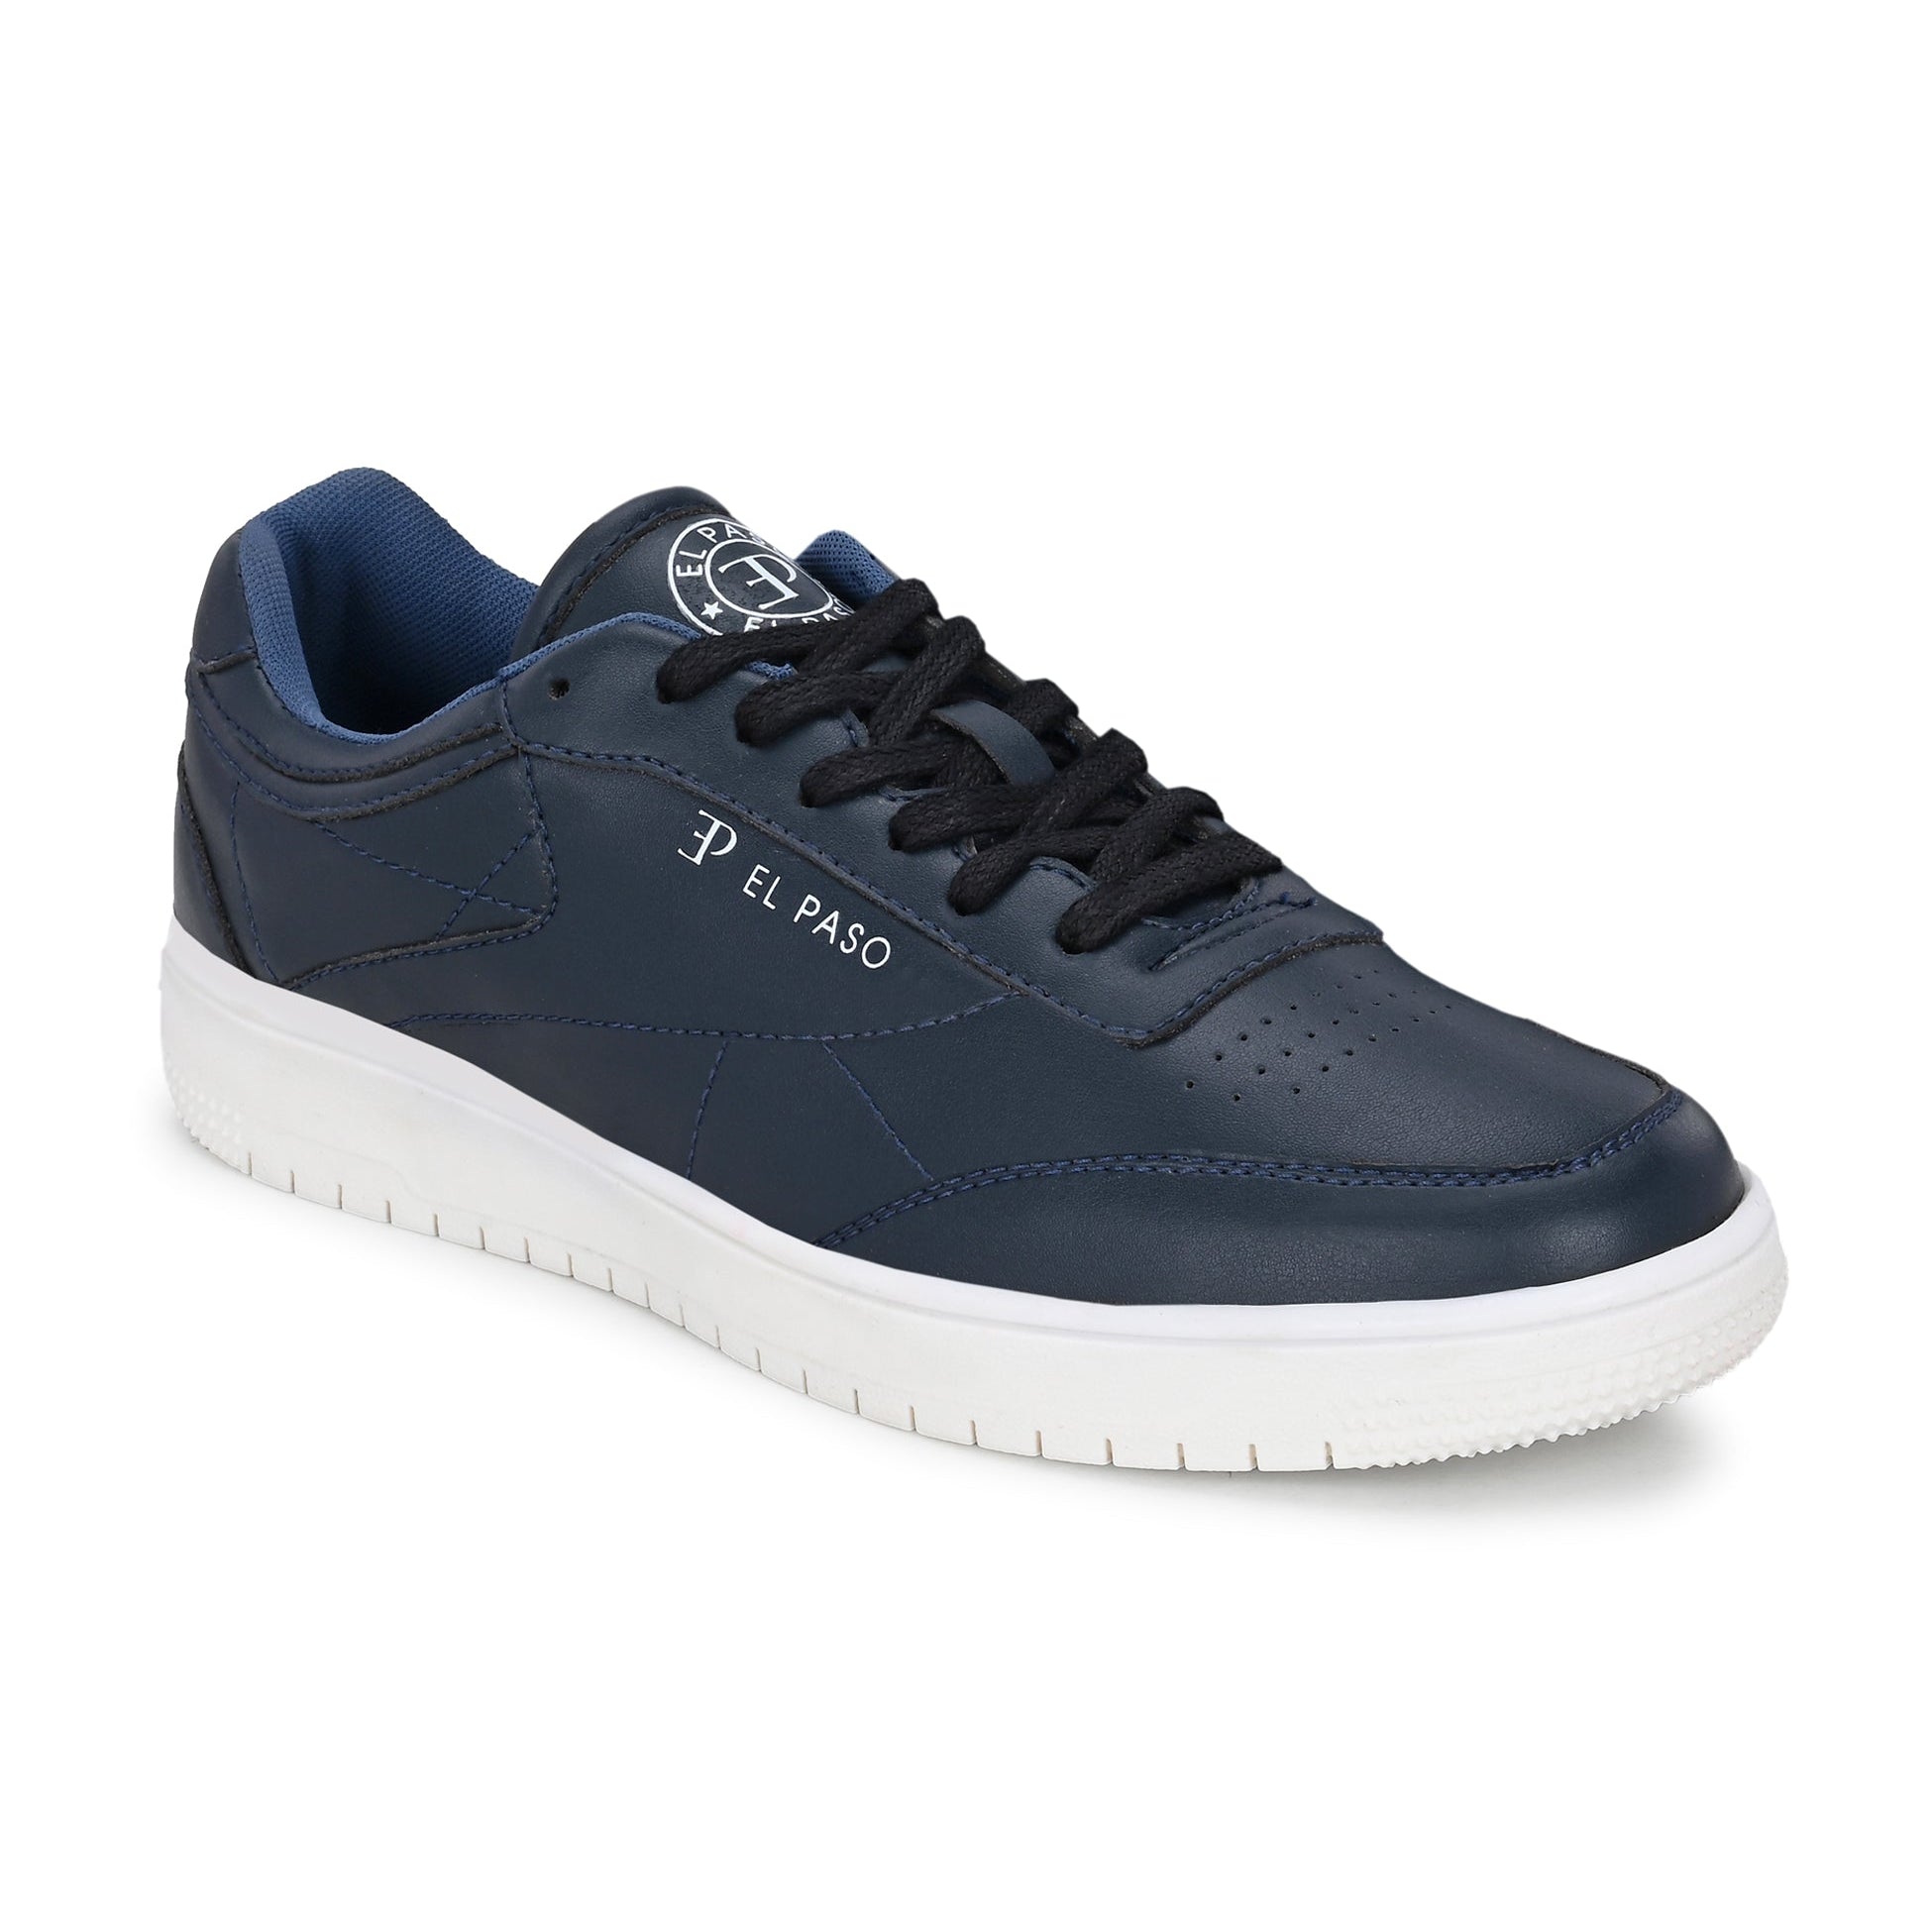 Navy Blue colour Men's casual lace-up sneakers with navy blue laces.